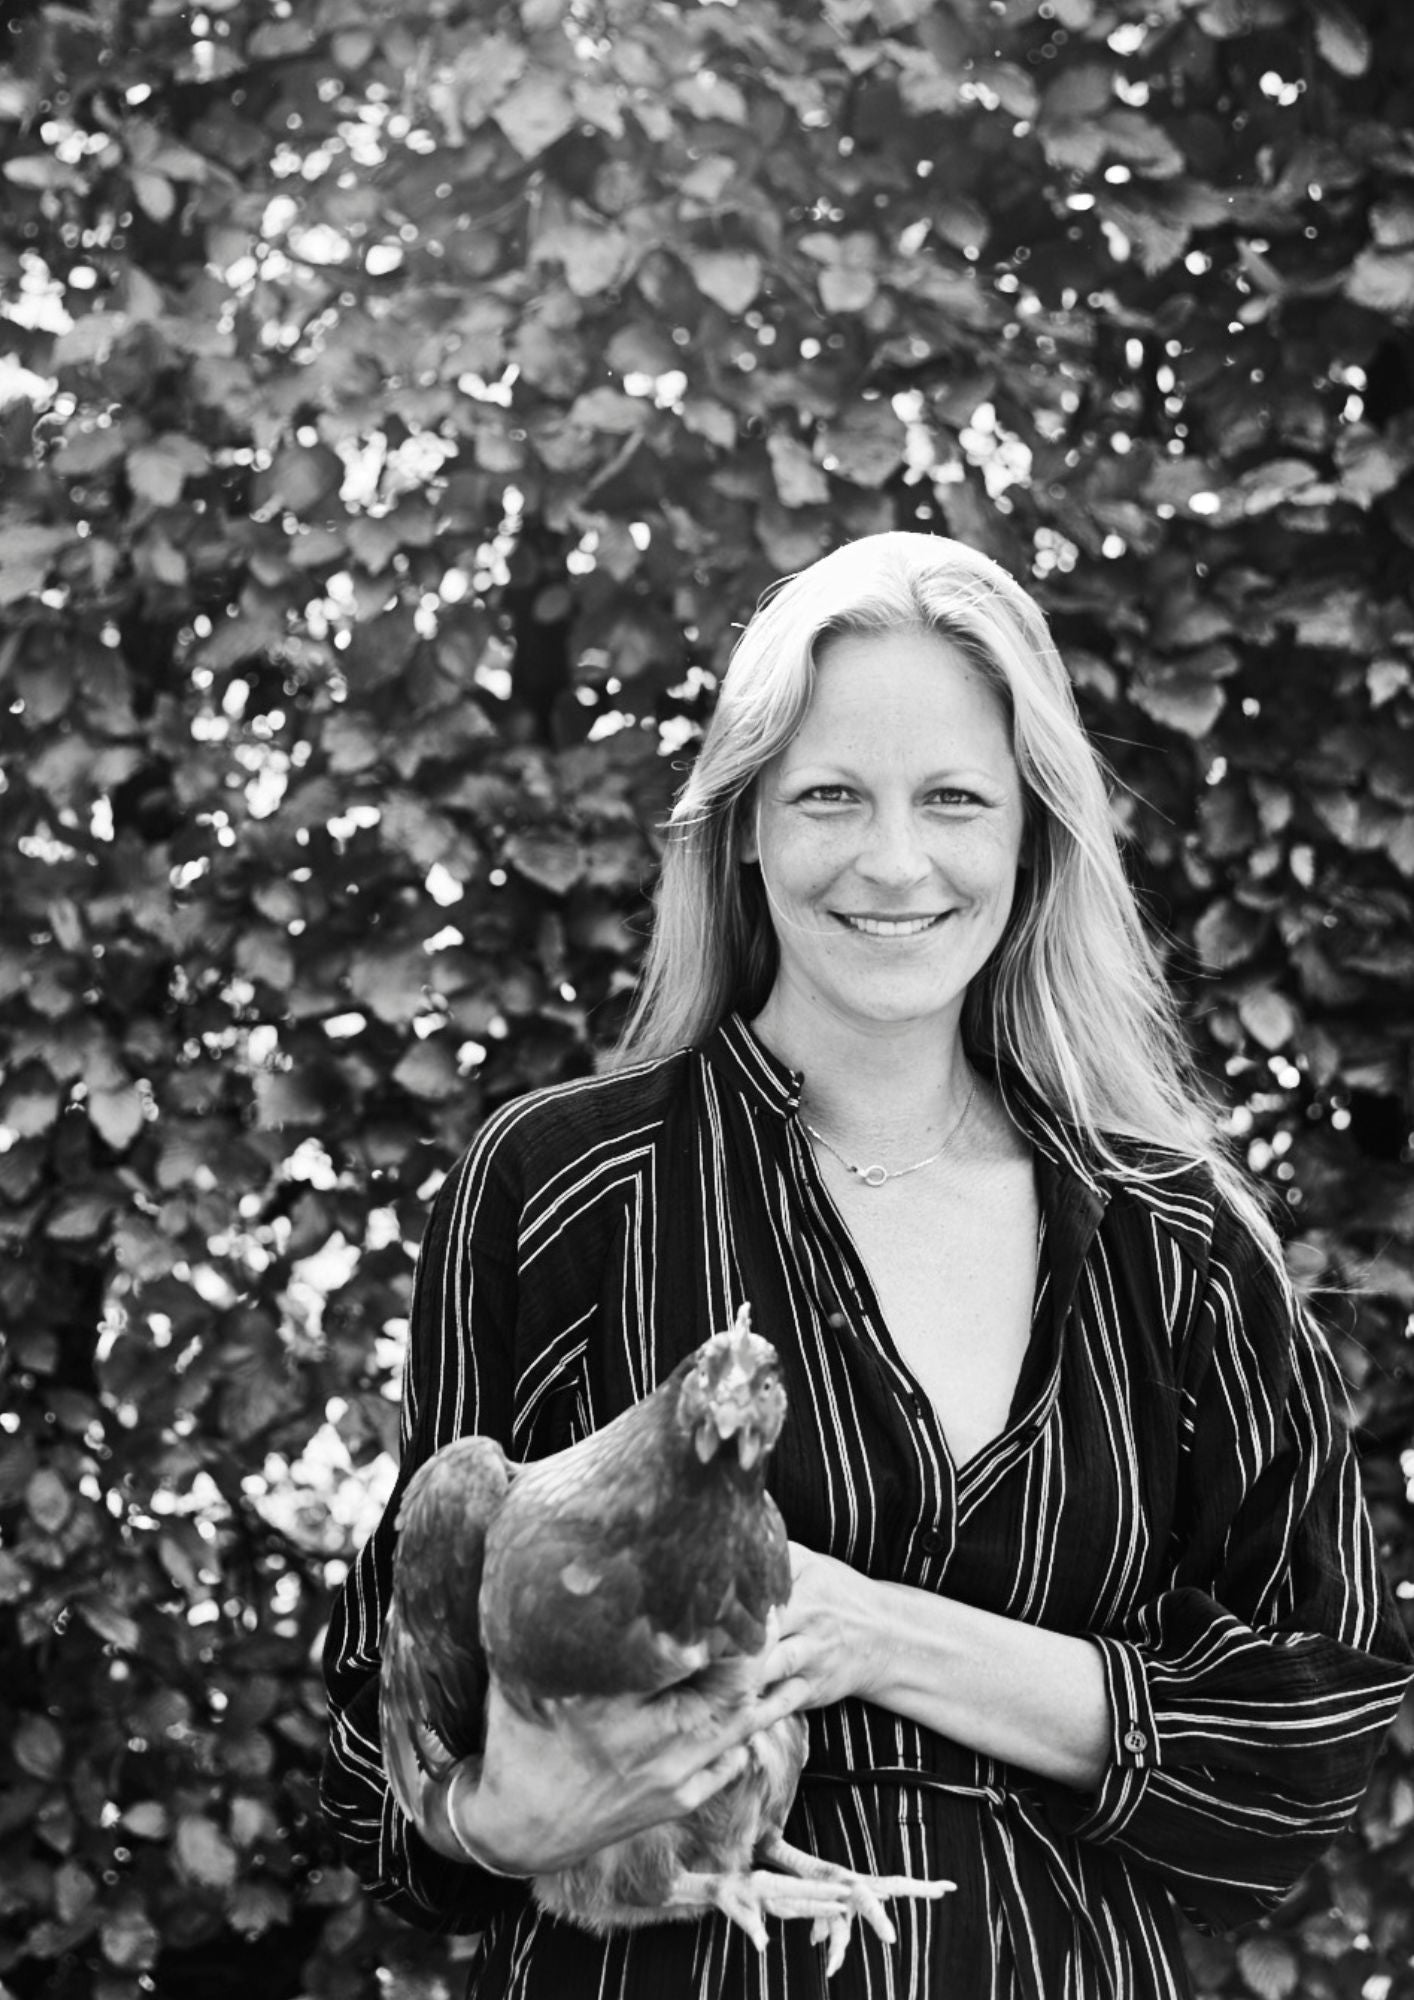 Seasonal Eating: Harness the Power of Spring with Camilla Ahlqvist